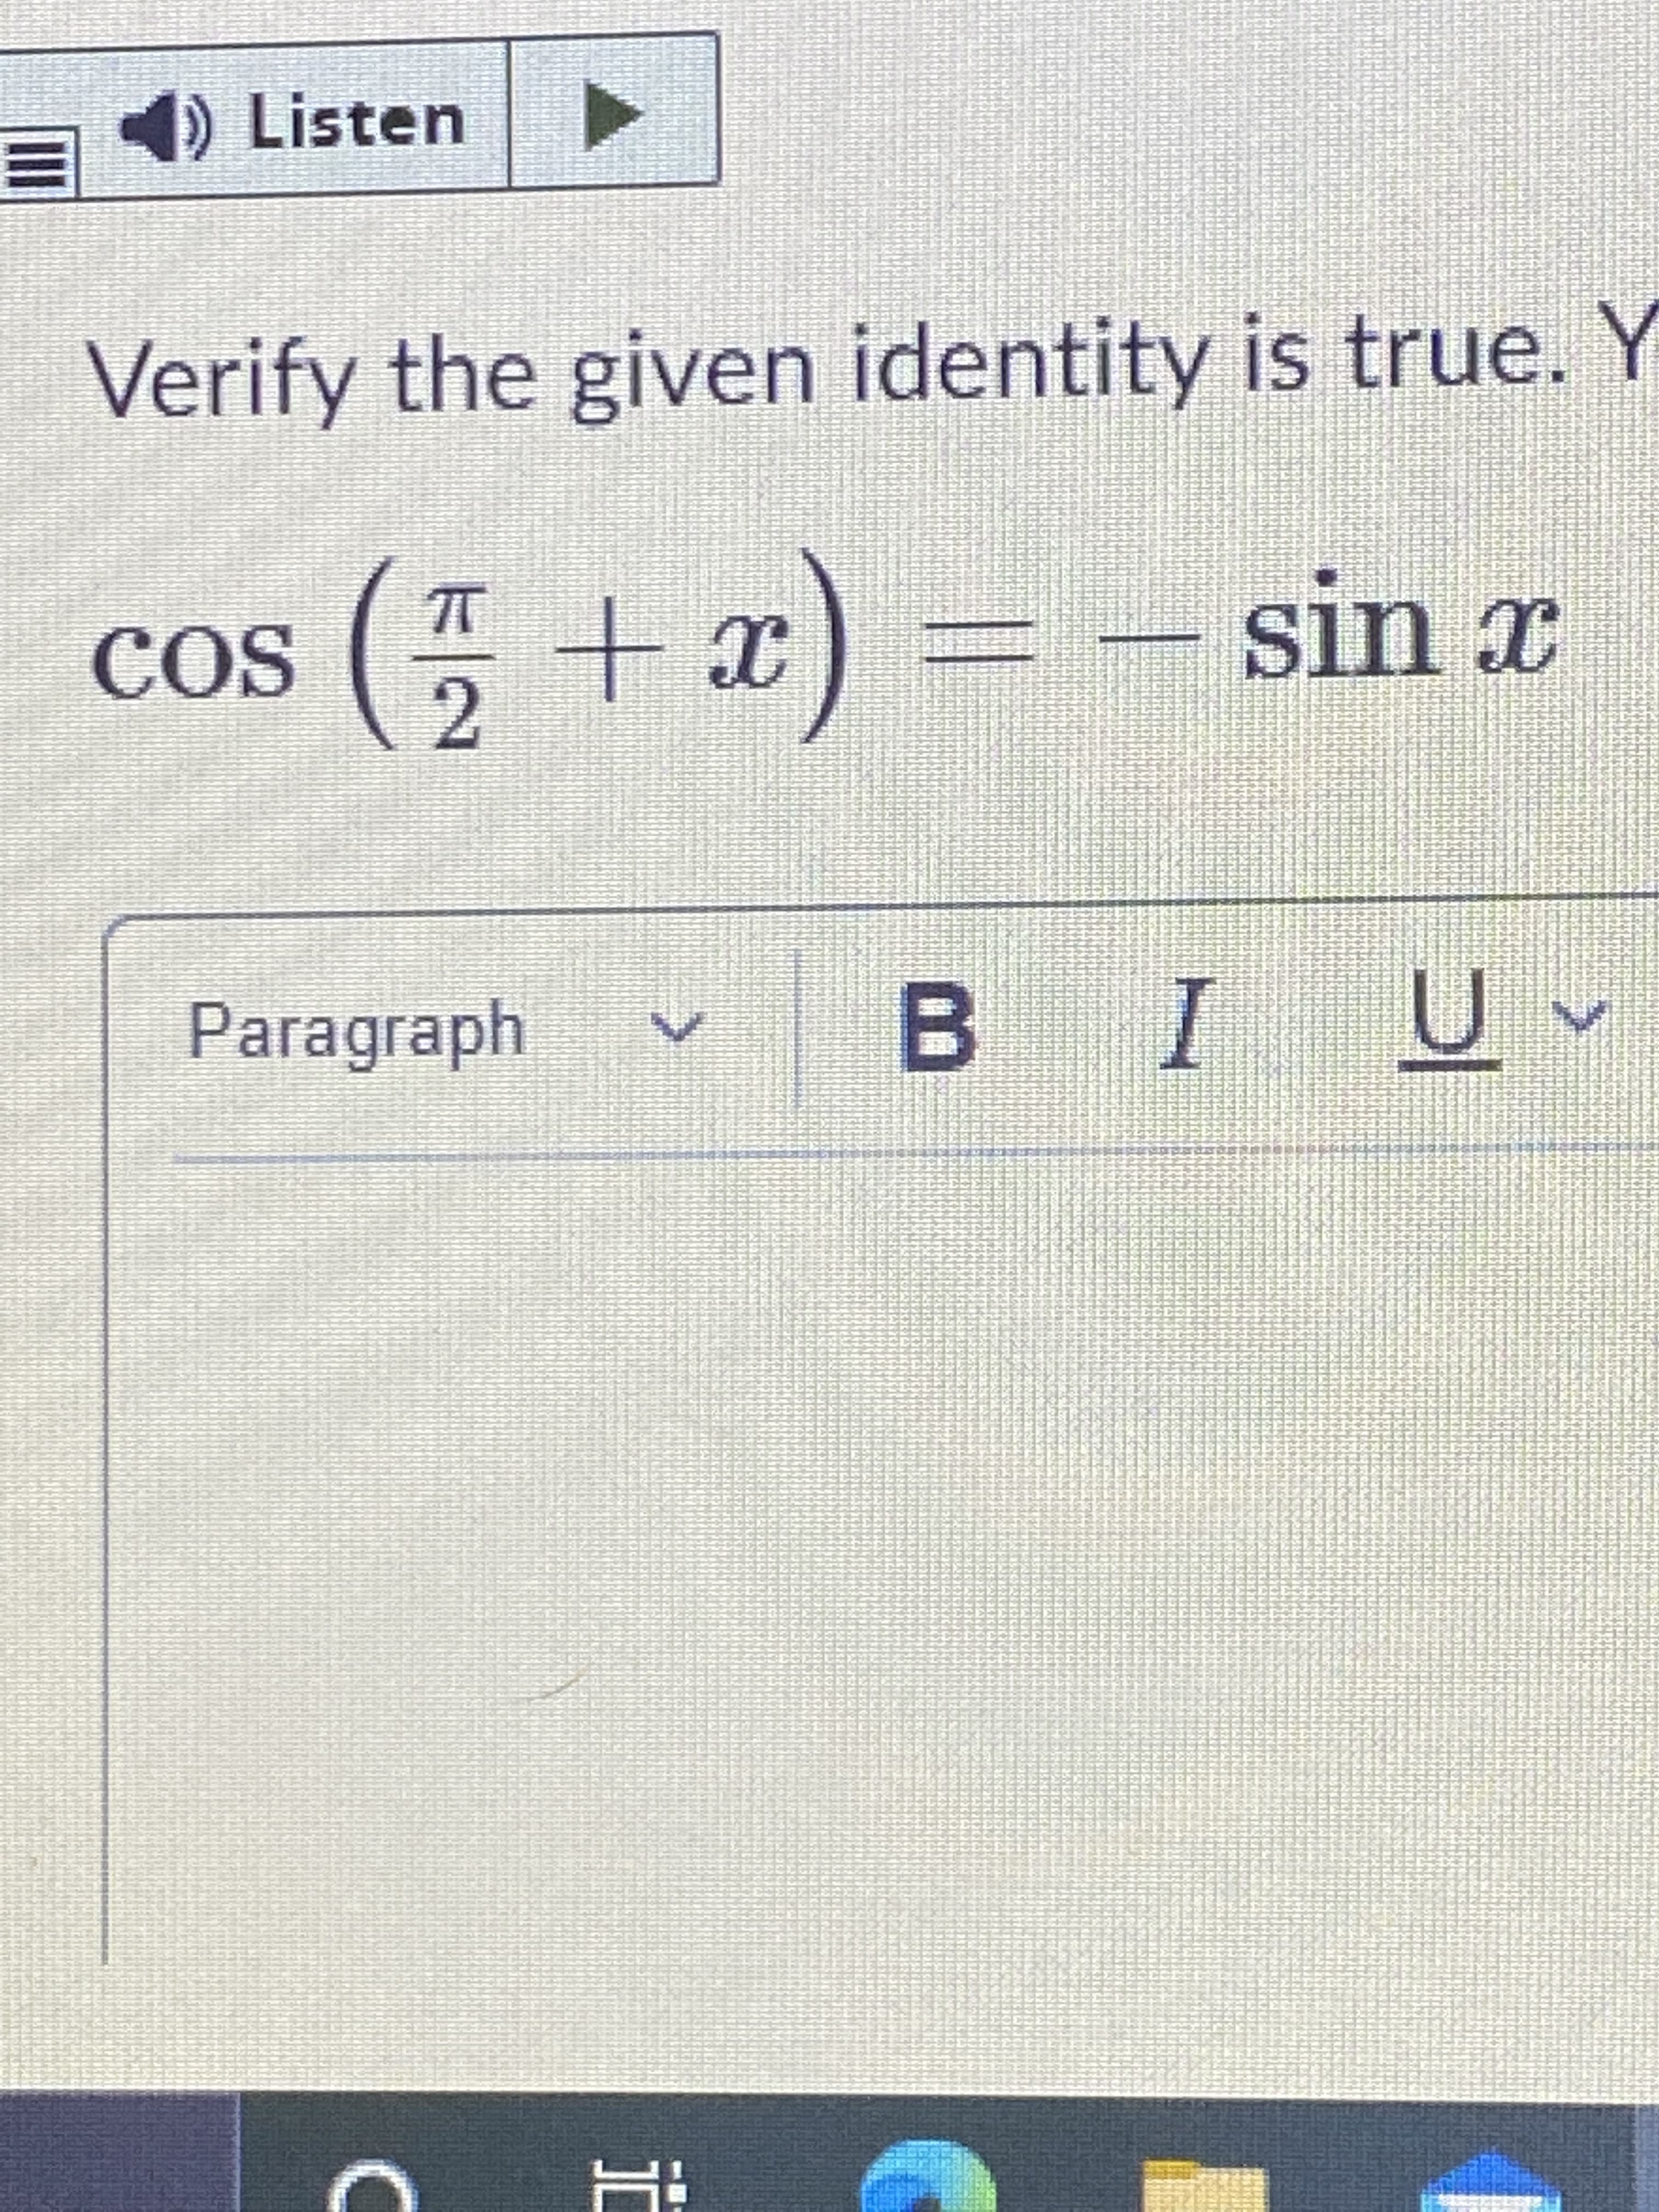 Listen
Verify the given identity is true. Y
( + x) = – sin x
X UIS
COS
Paragraph
a ñ I 8
